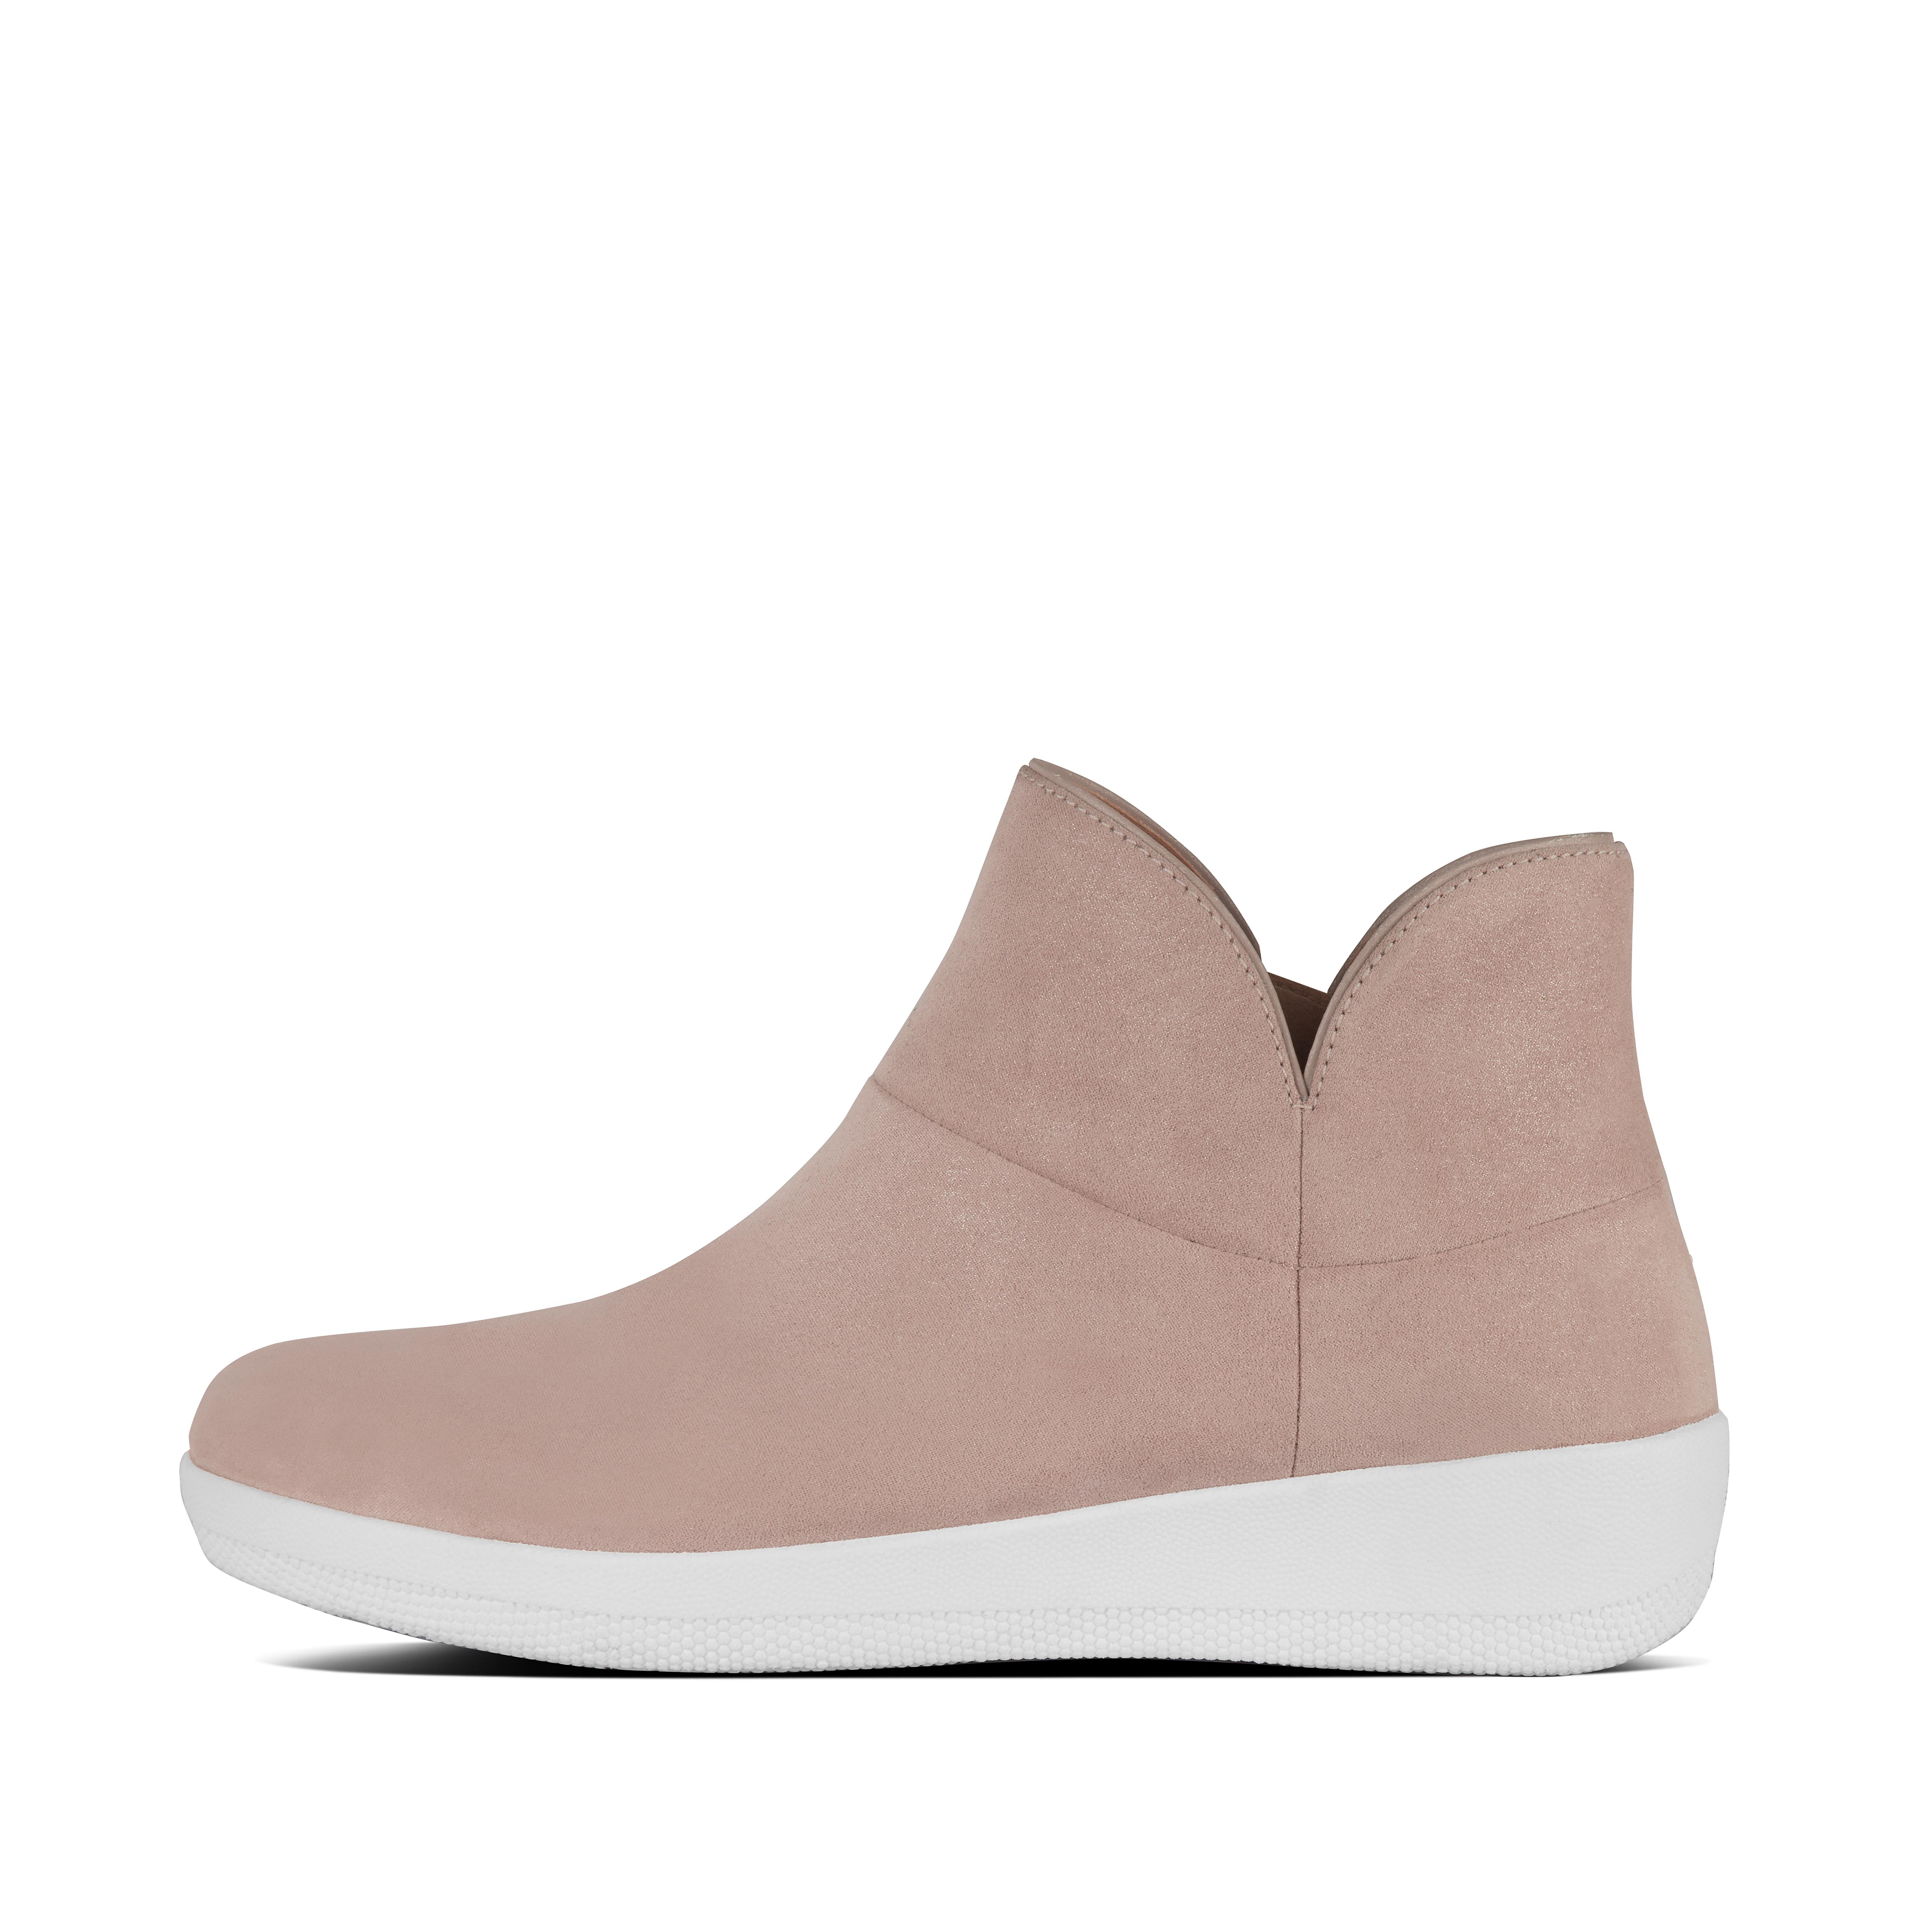 fitflop ankle boots sale